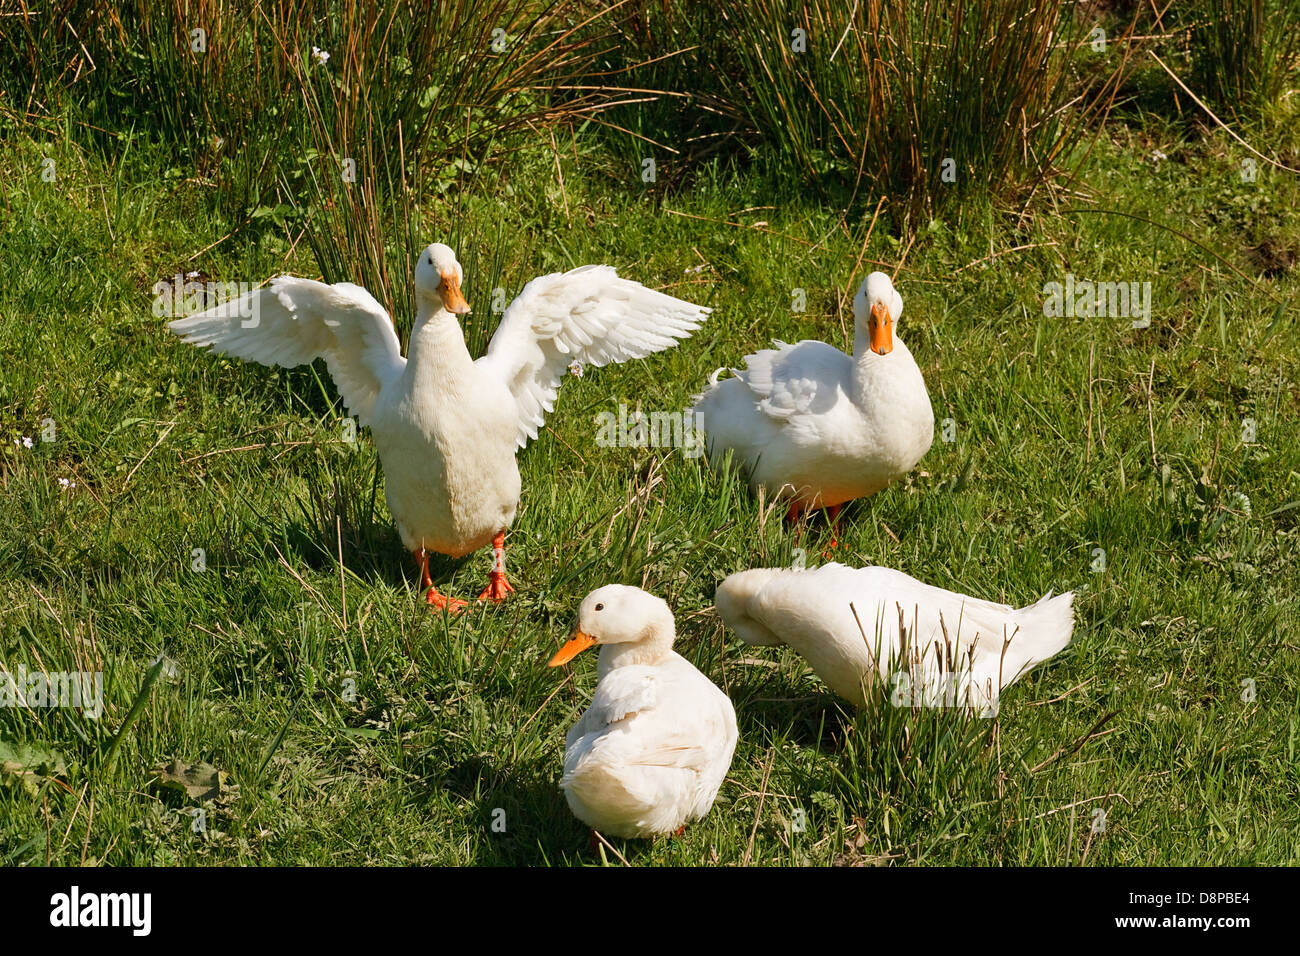 Family of domestic ducks often farmed for meat, eggs and down pillow feathers Stock Photo